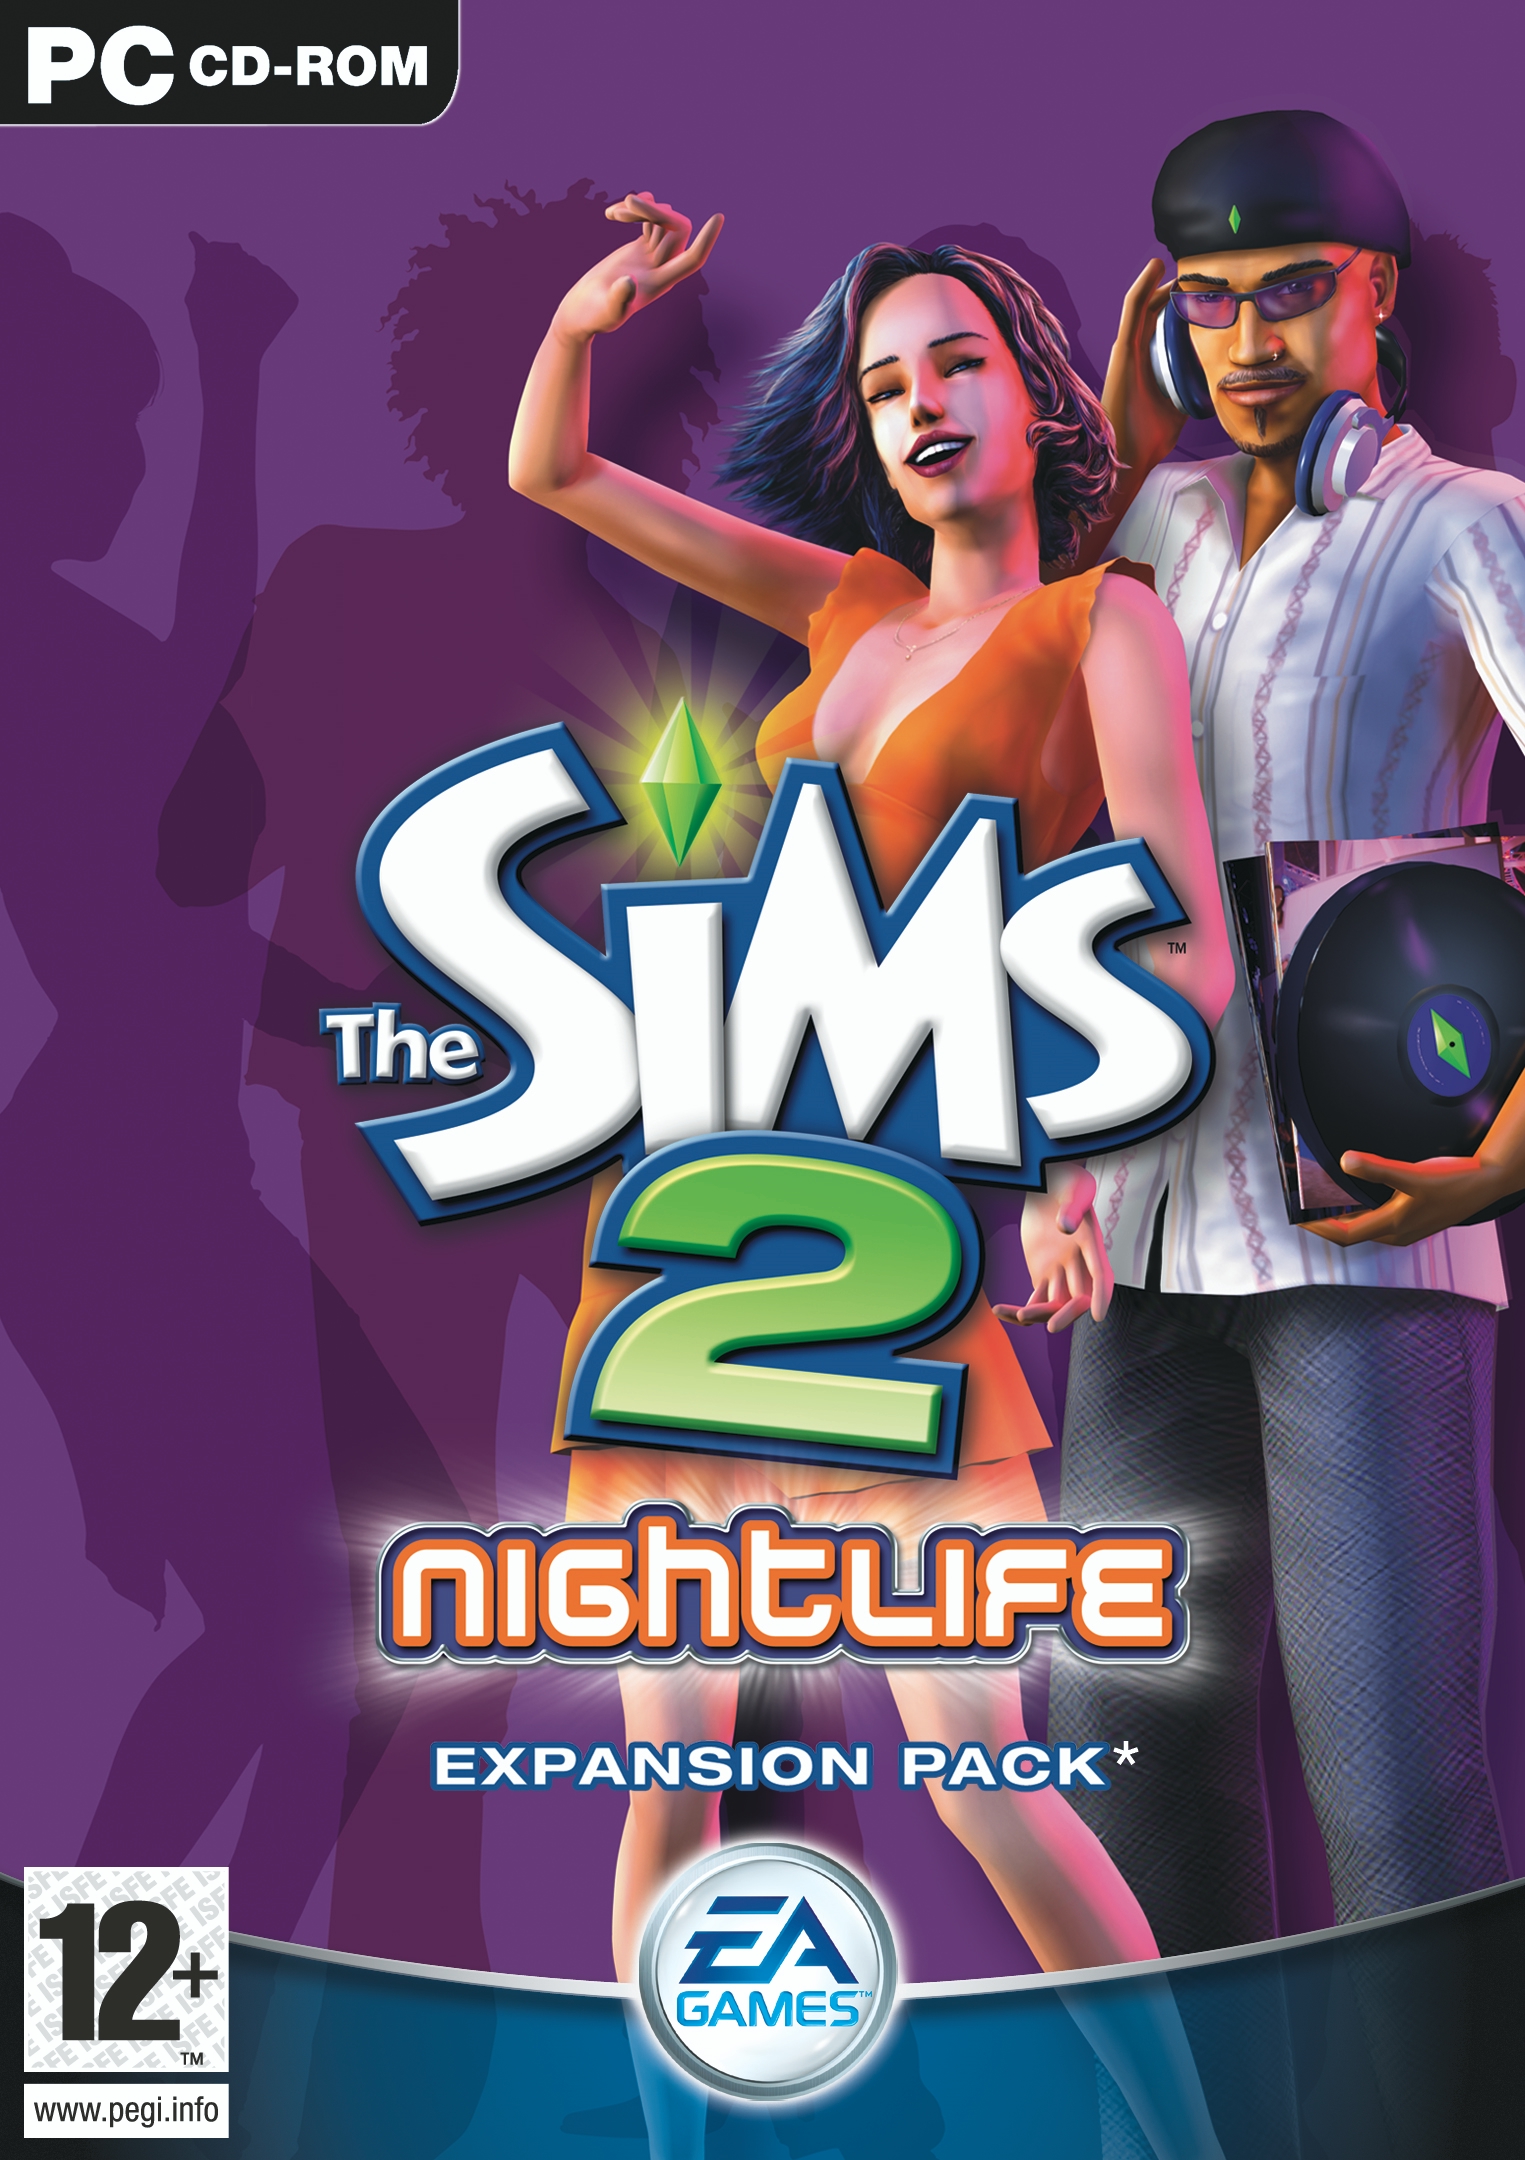 The Sims 2 - Wikipedia